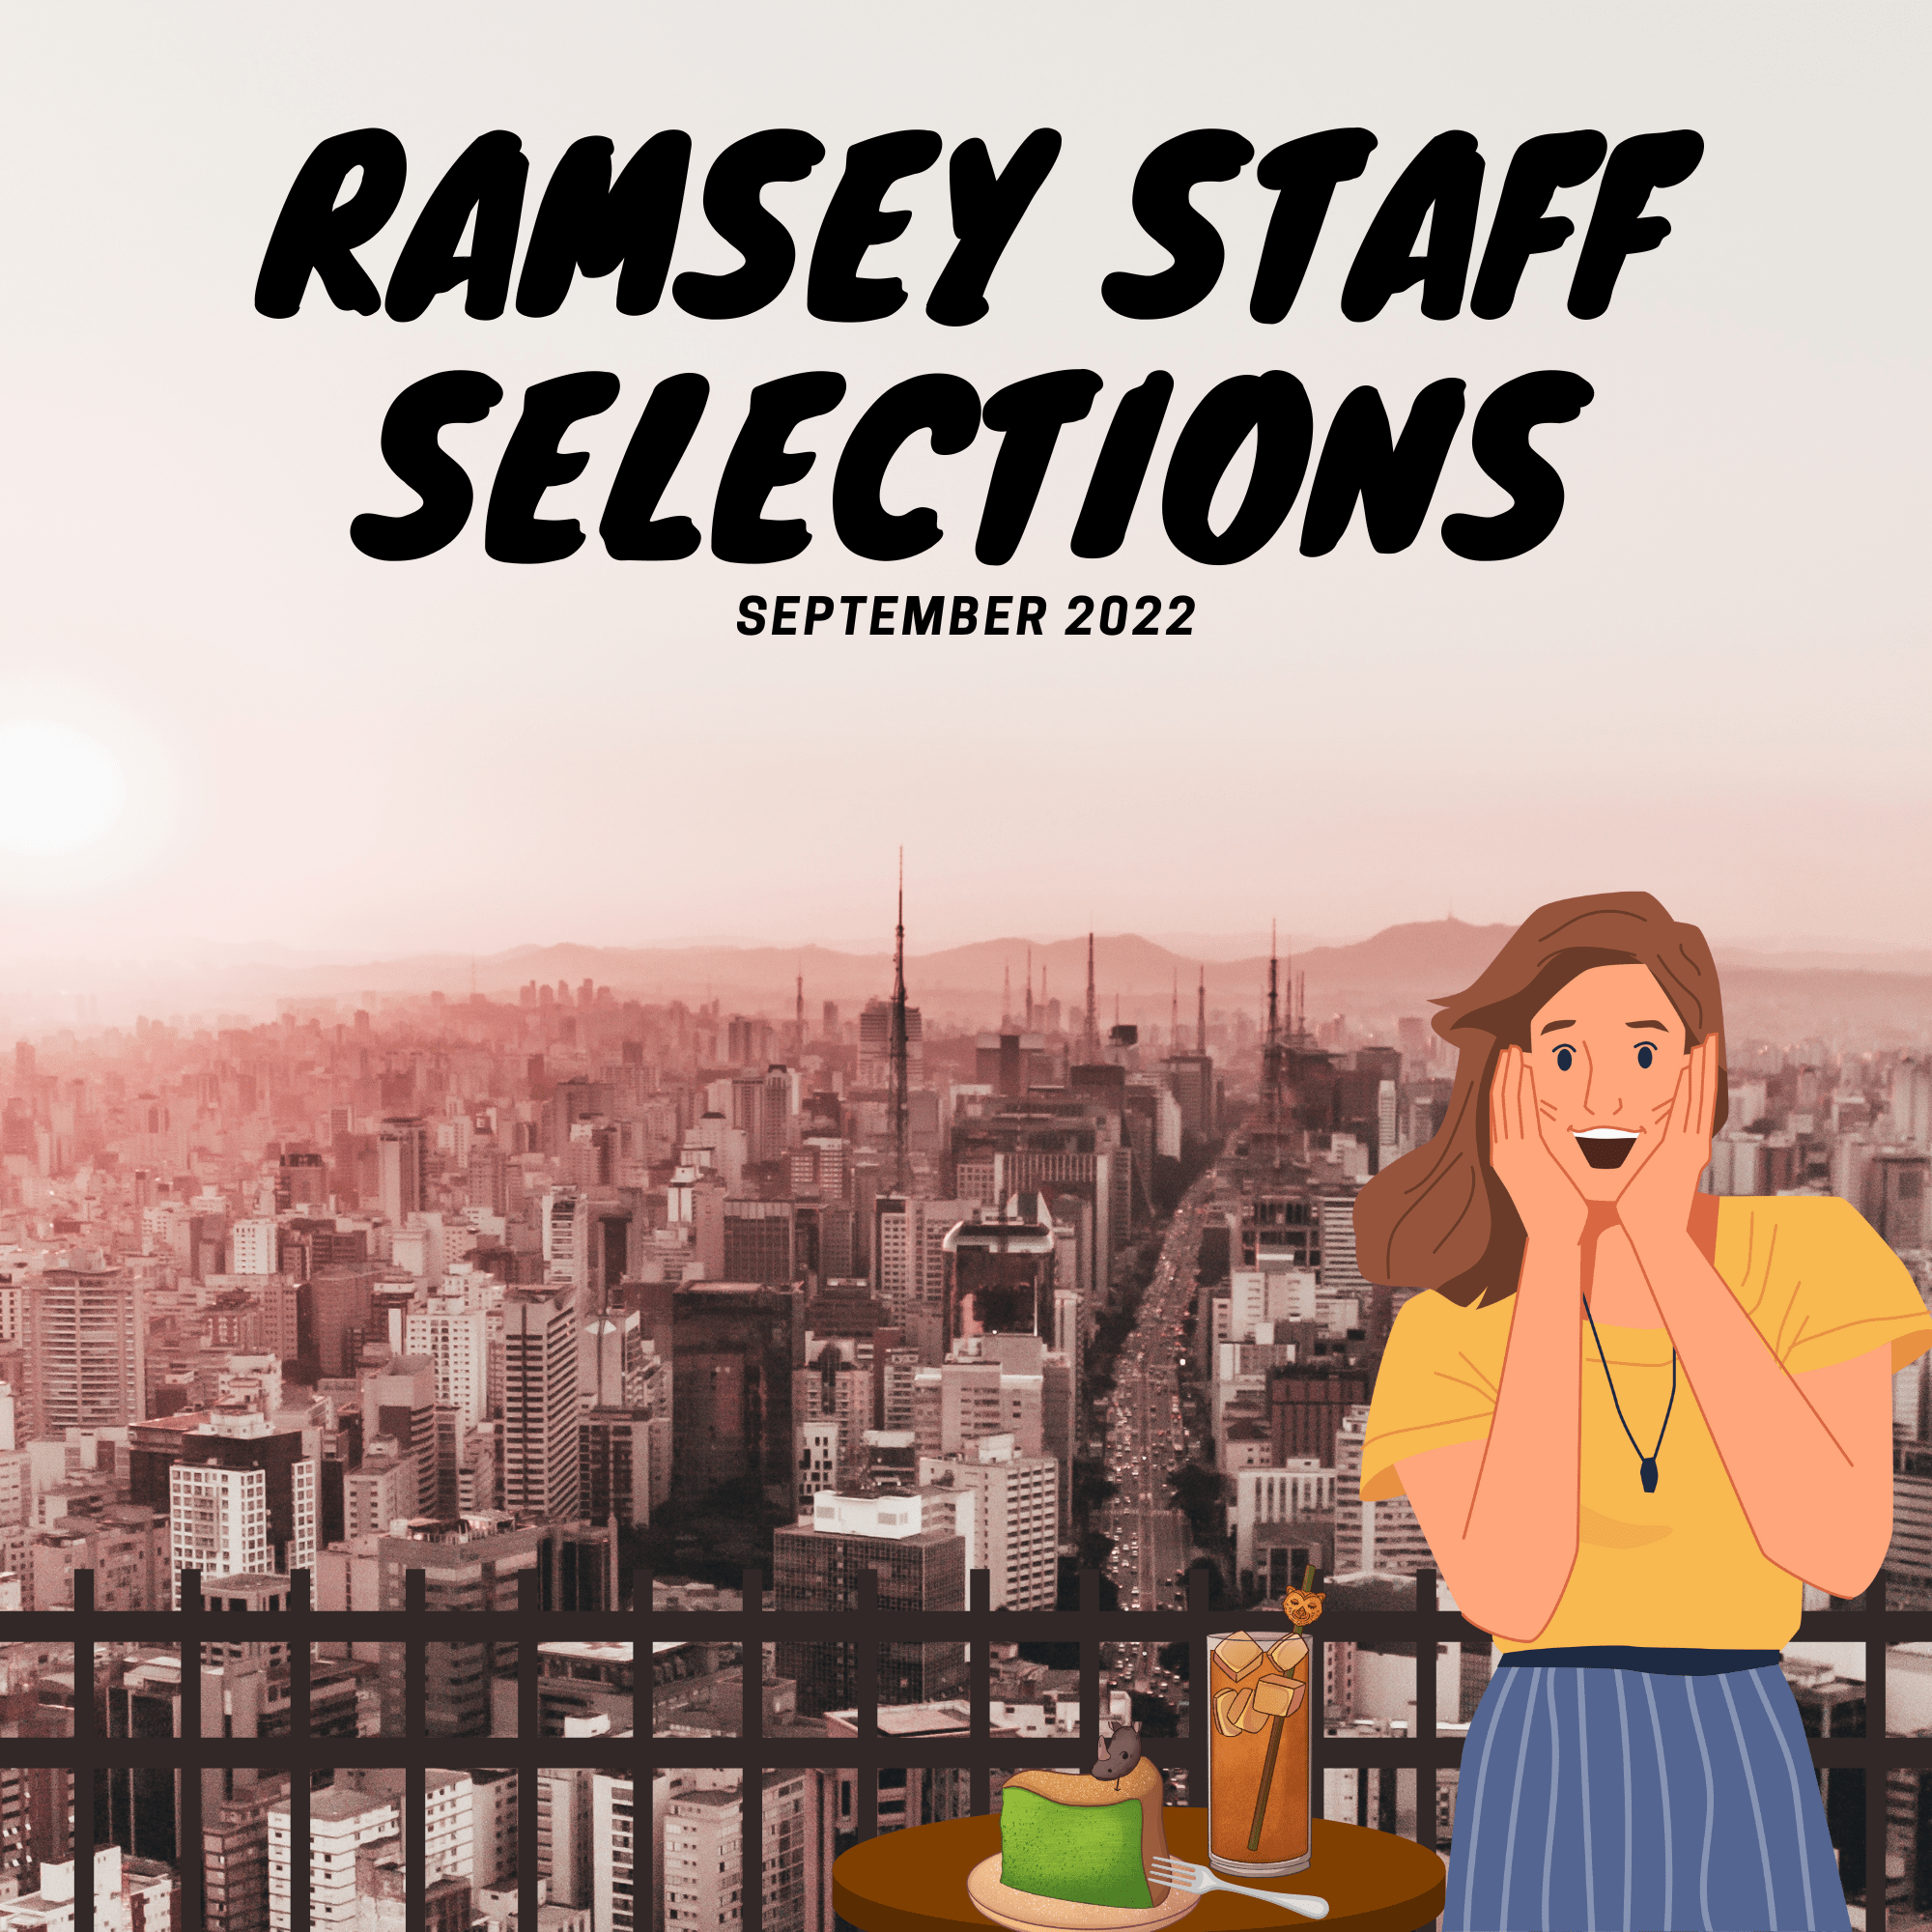 Ramsey Staff Selections for September 2022